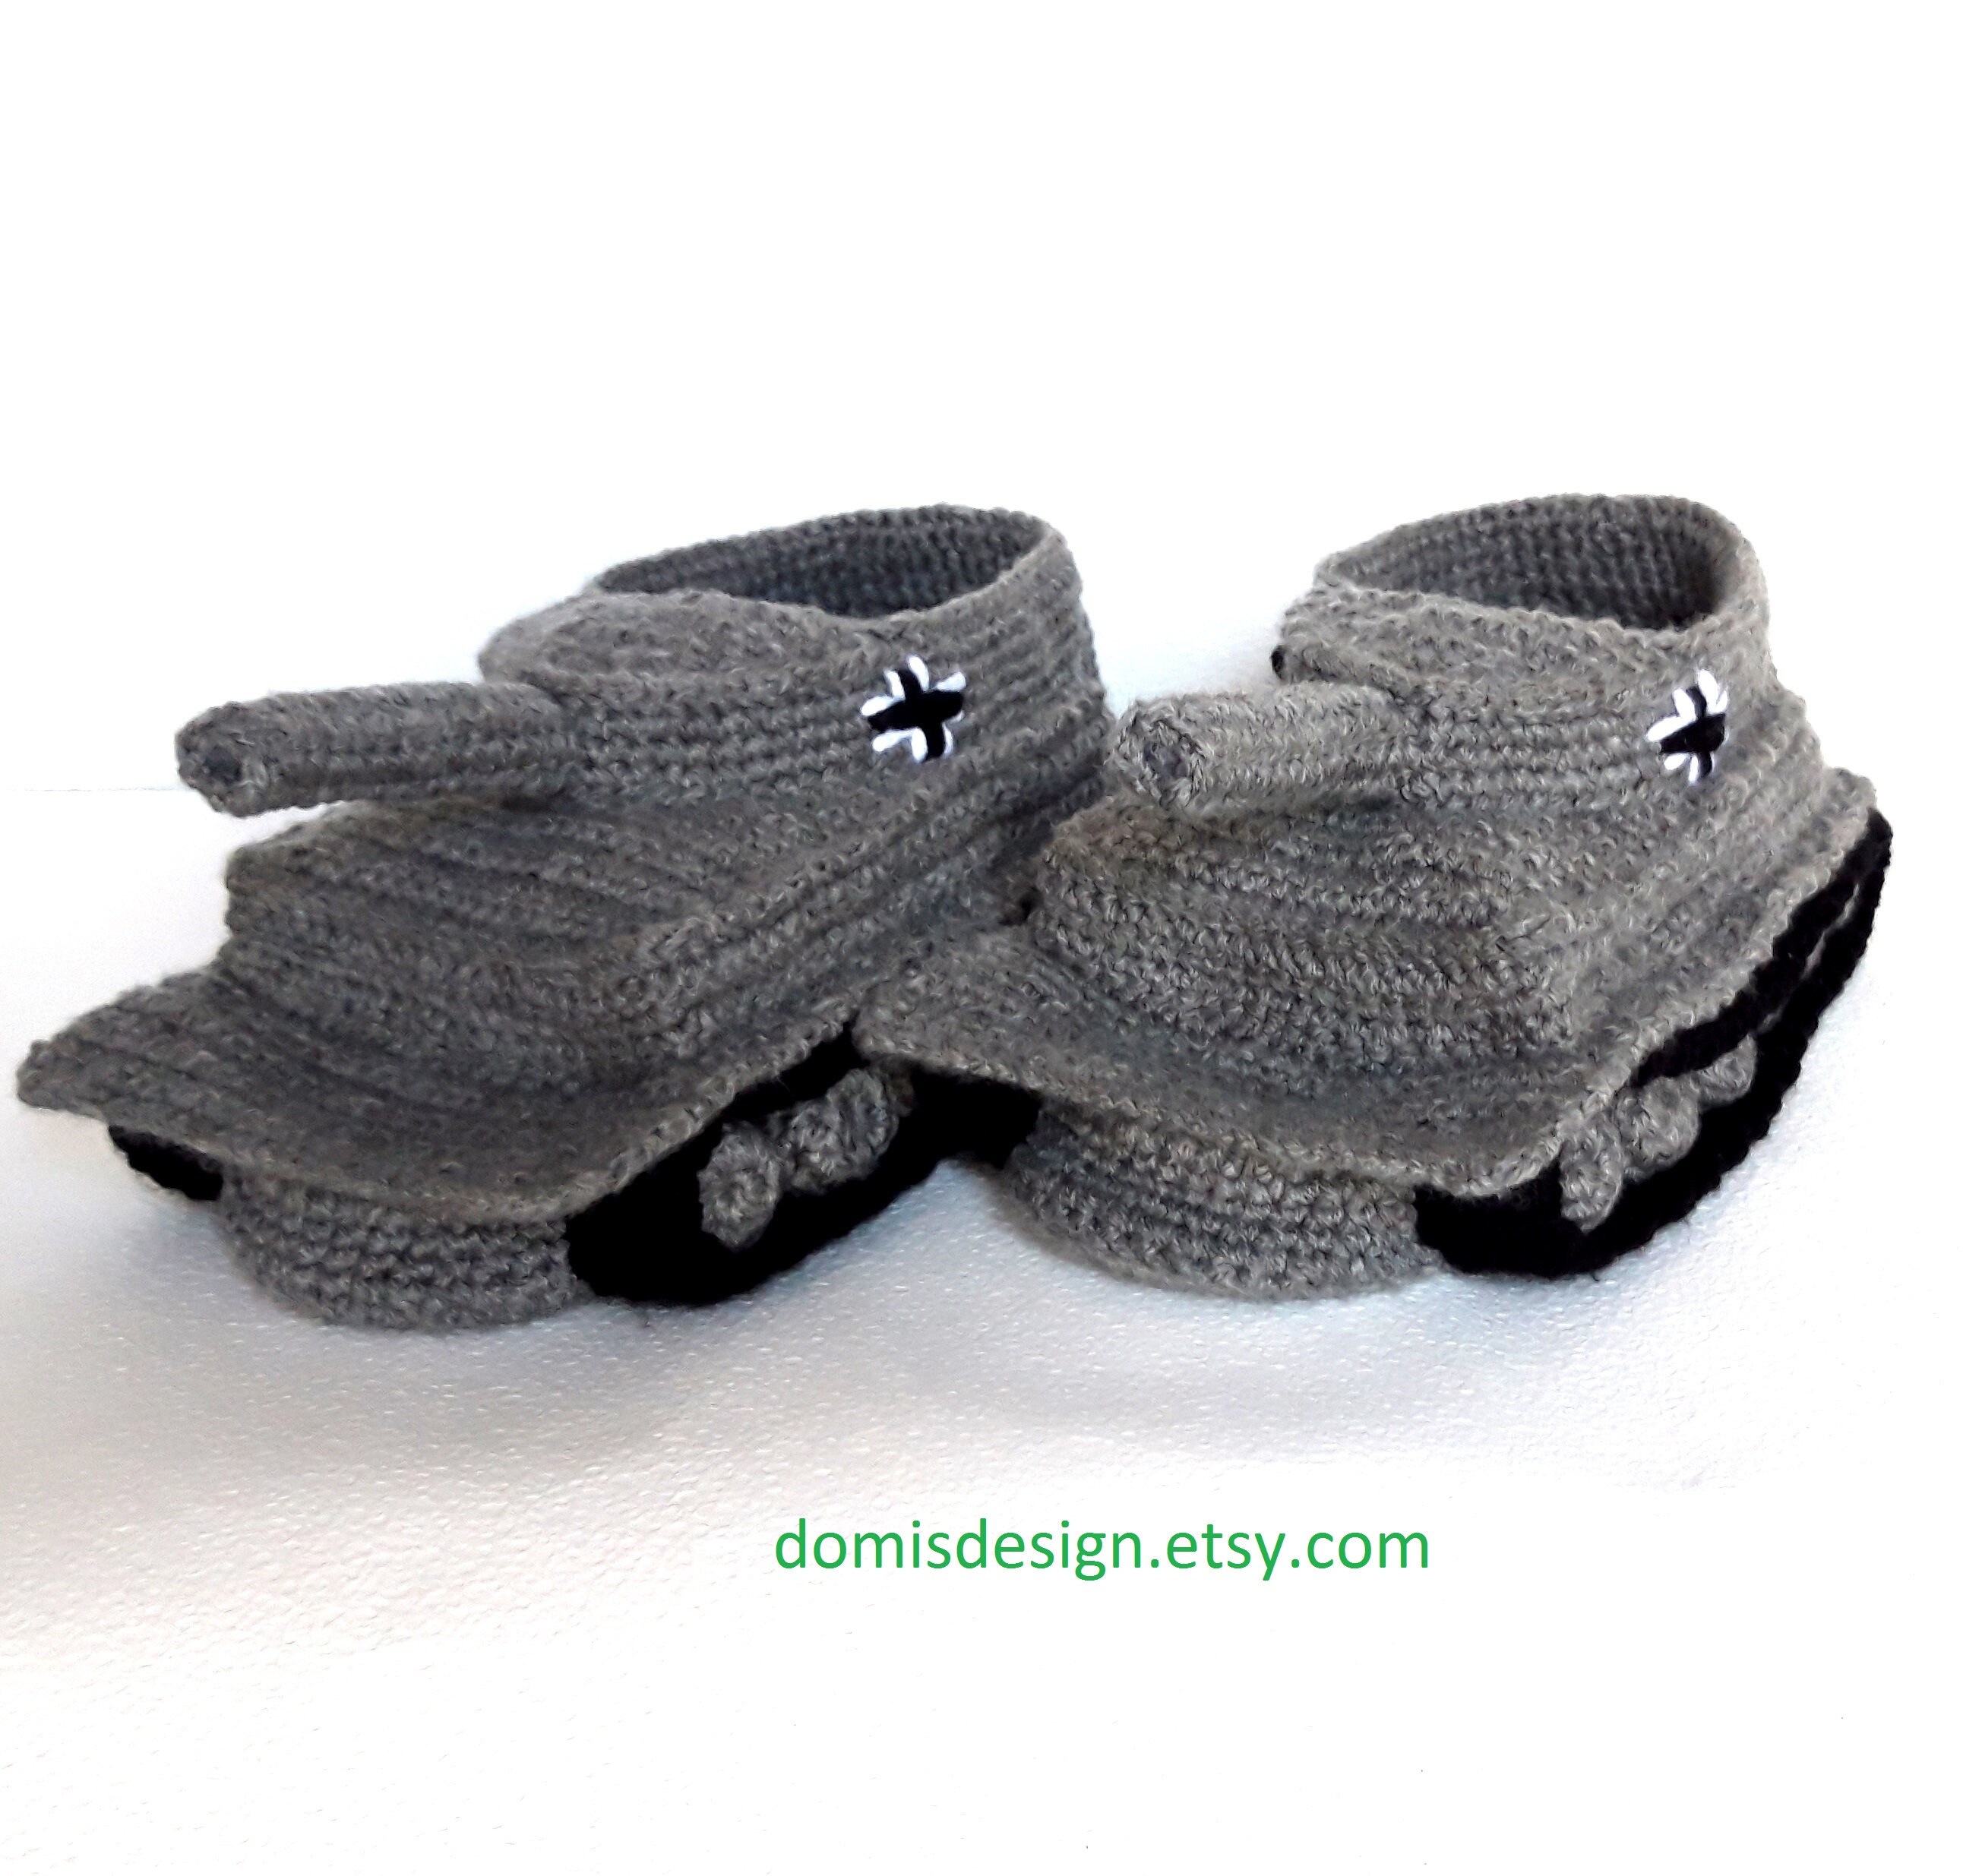 Tank Slippers, Battle Slippers, Men Shoes, Army Tank Slippers, Panzer  Hausschuhe, Panzer Tank Slippers, Slipper Tanks, Slipper Boot Men - Etsy